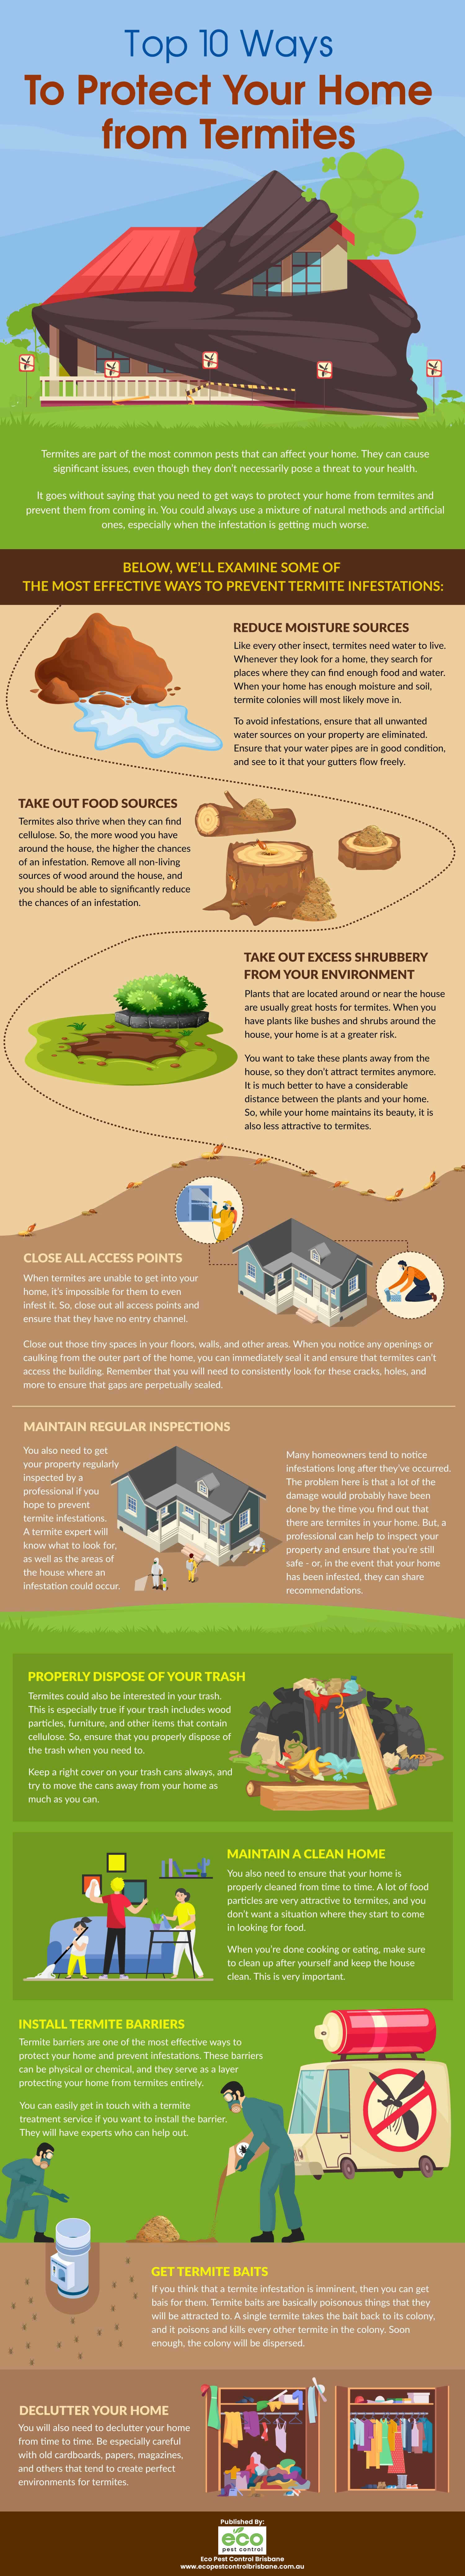 top-10-ways-to-protect-your-home-from-termites-infographic-plaza